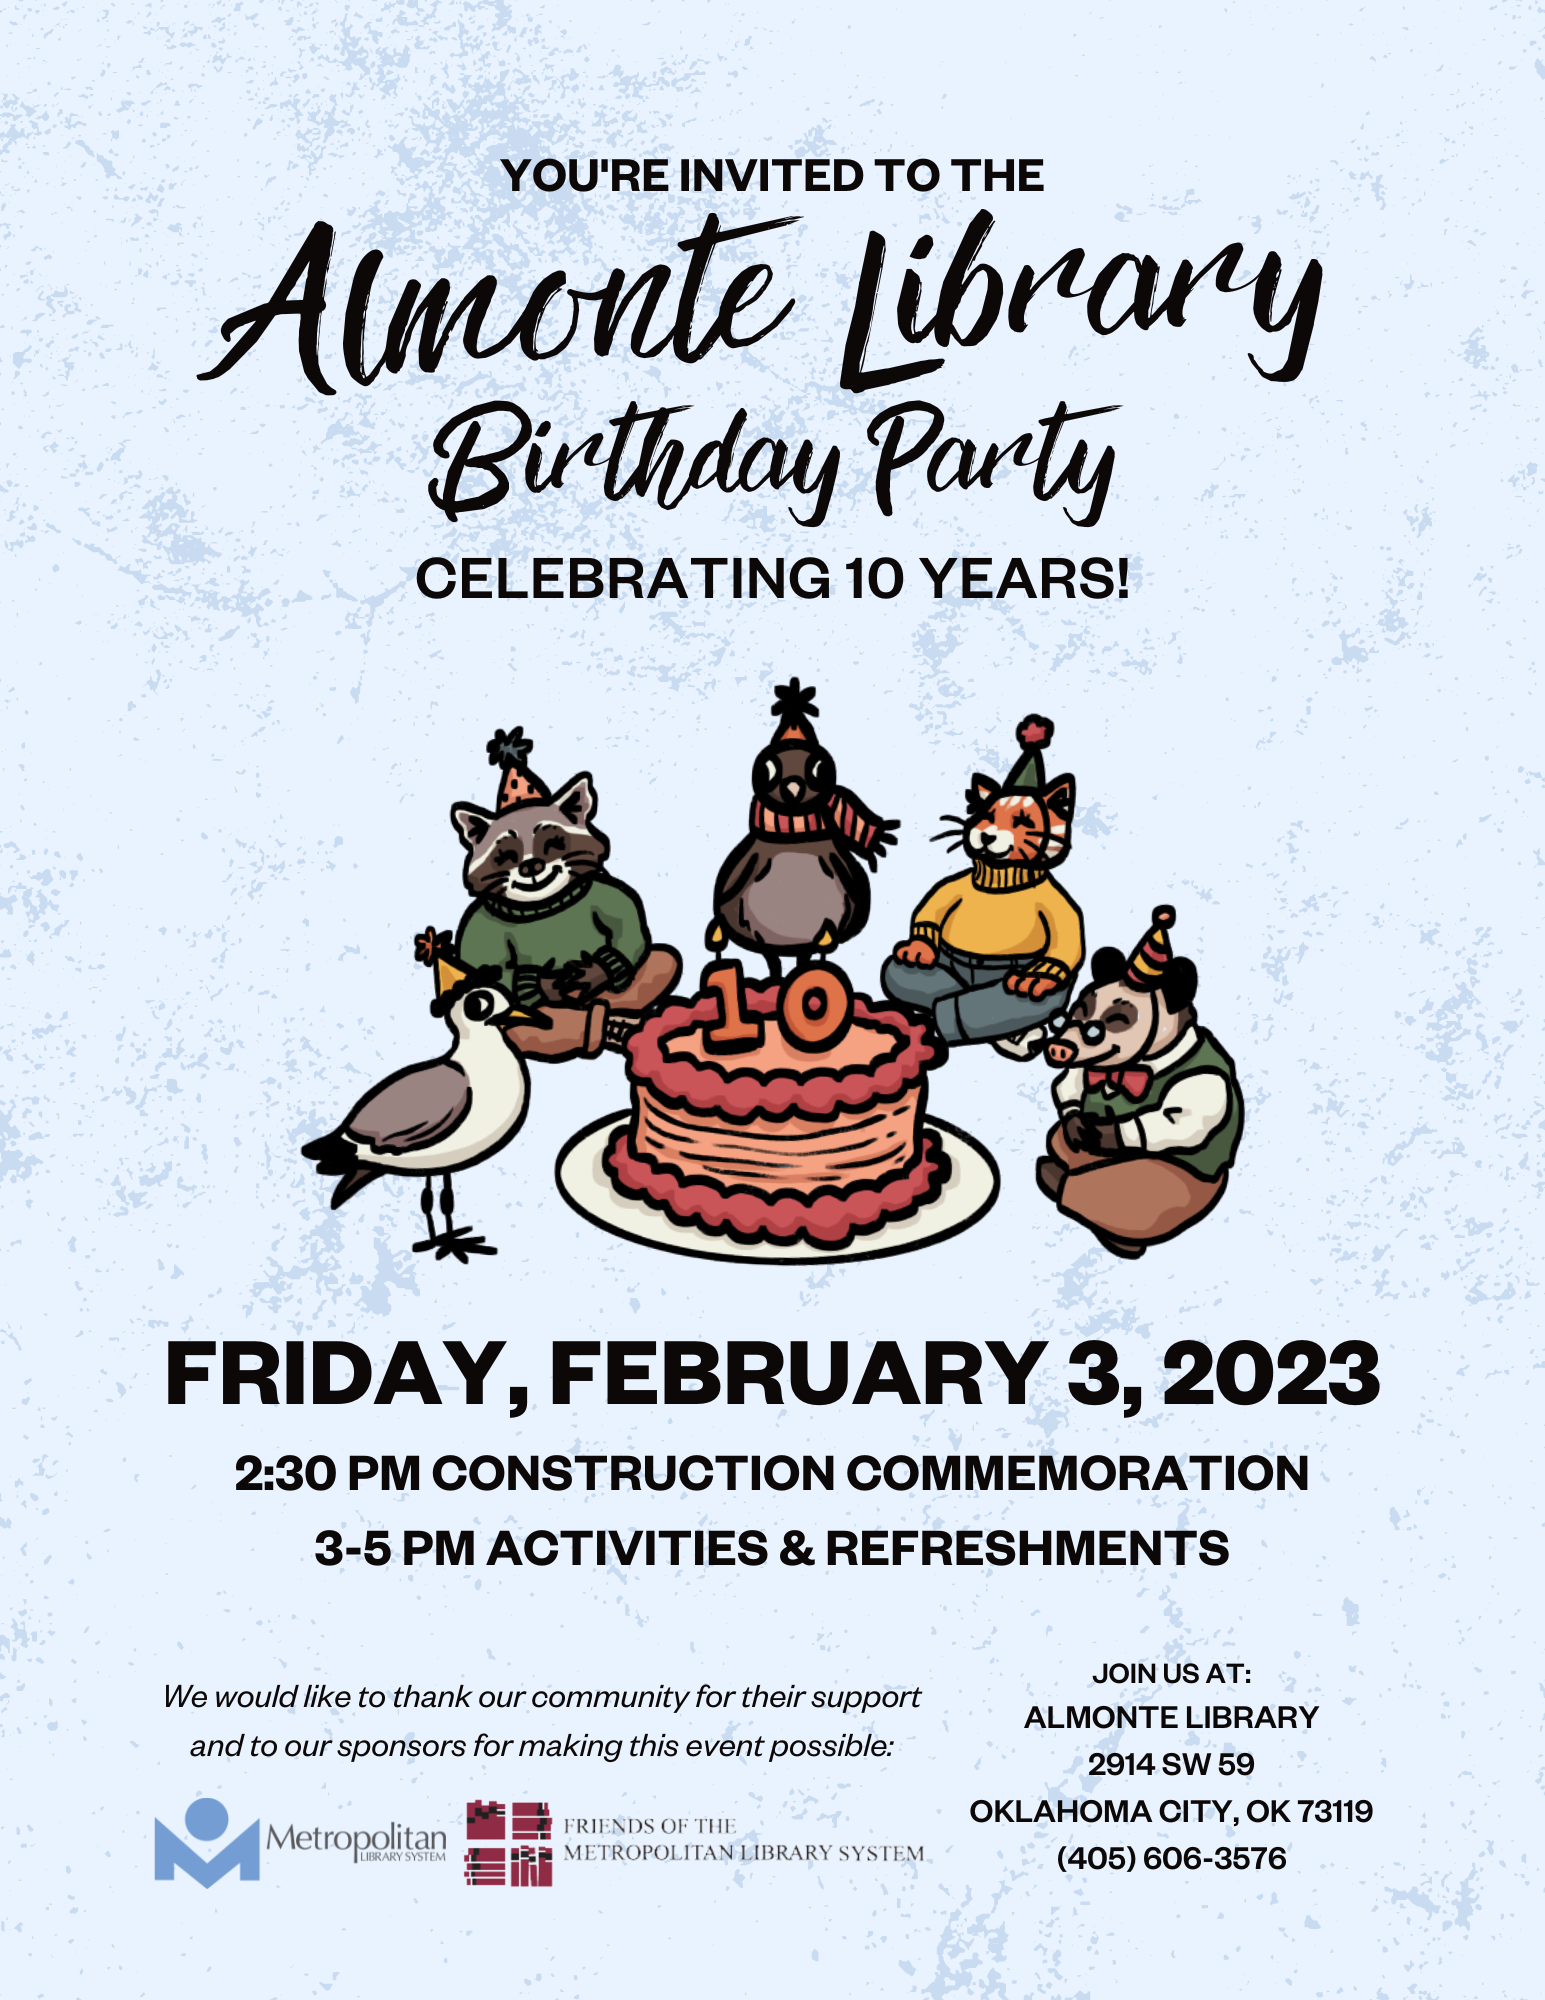 You're Invited to the Almonte Library Birthday Party!